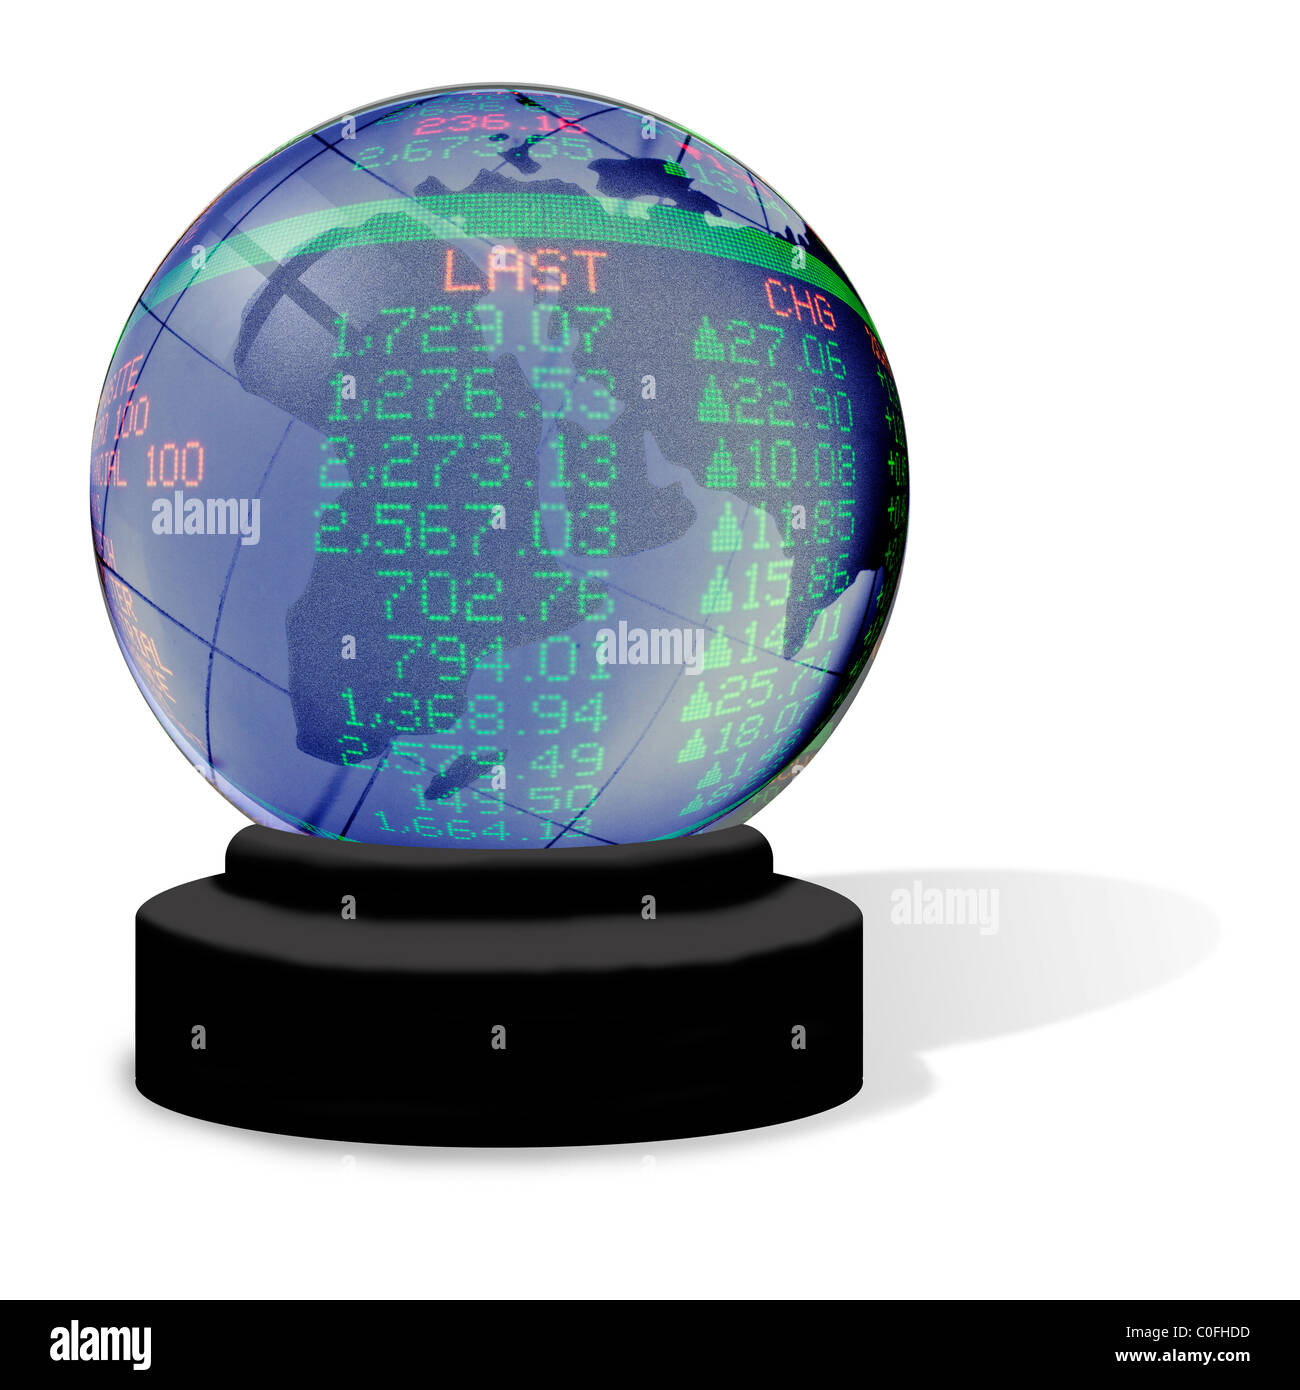 Crystal ball containing a world globe overlaid with a stock market tally board portraying the concept of global investments. Stock Photo